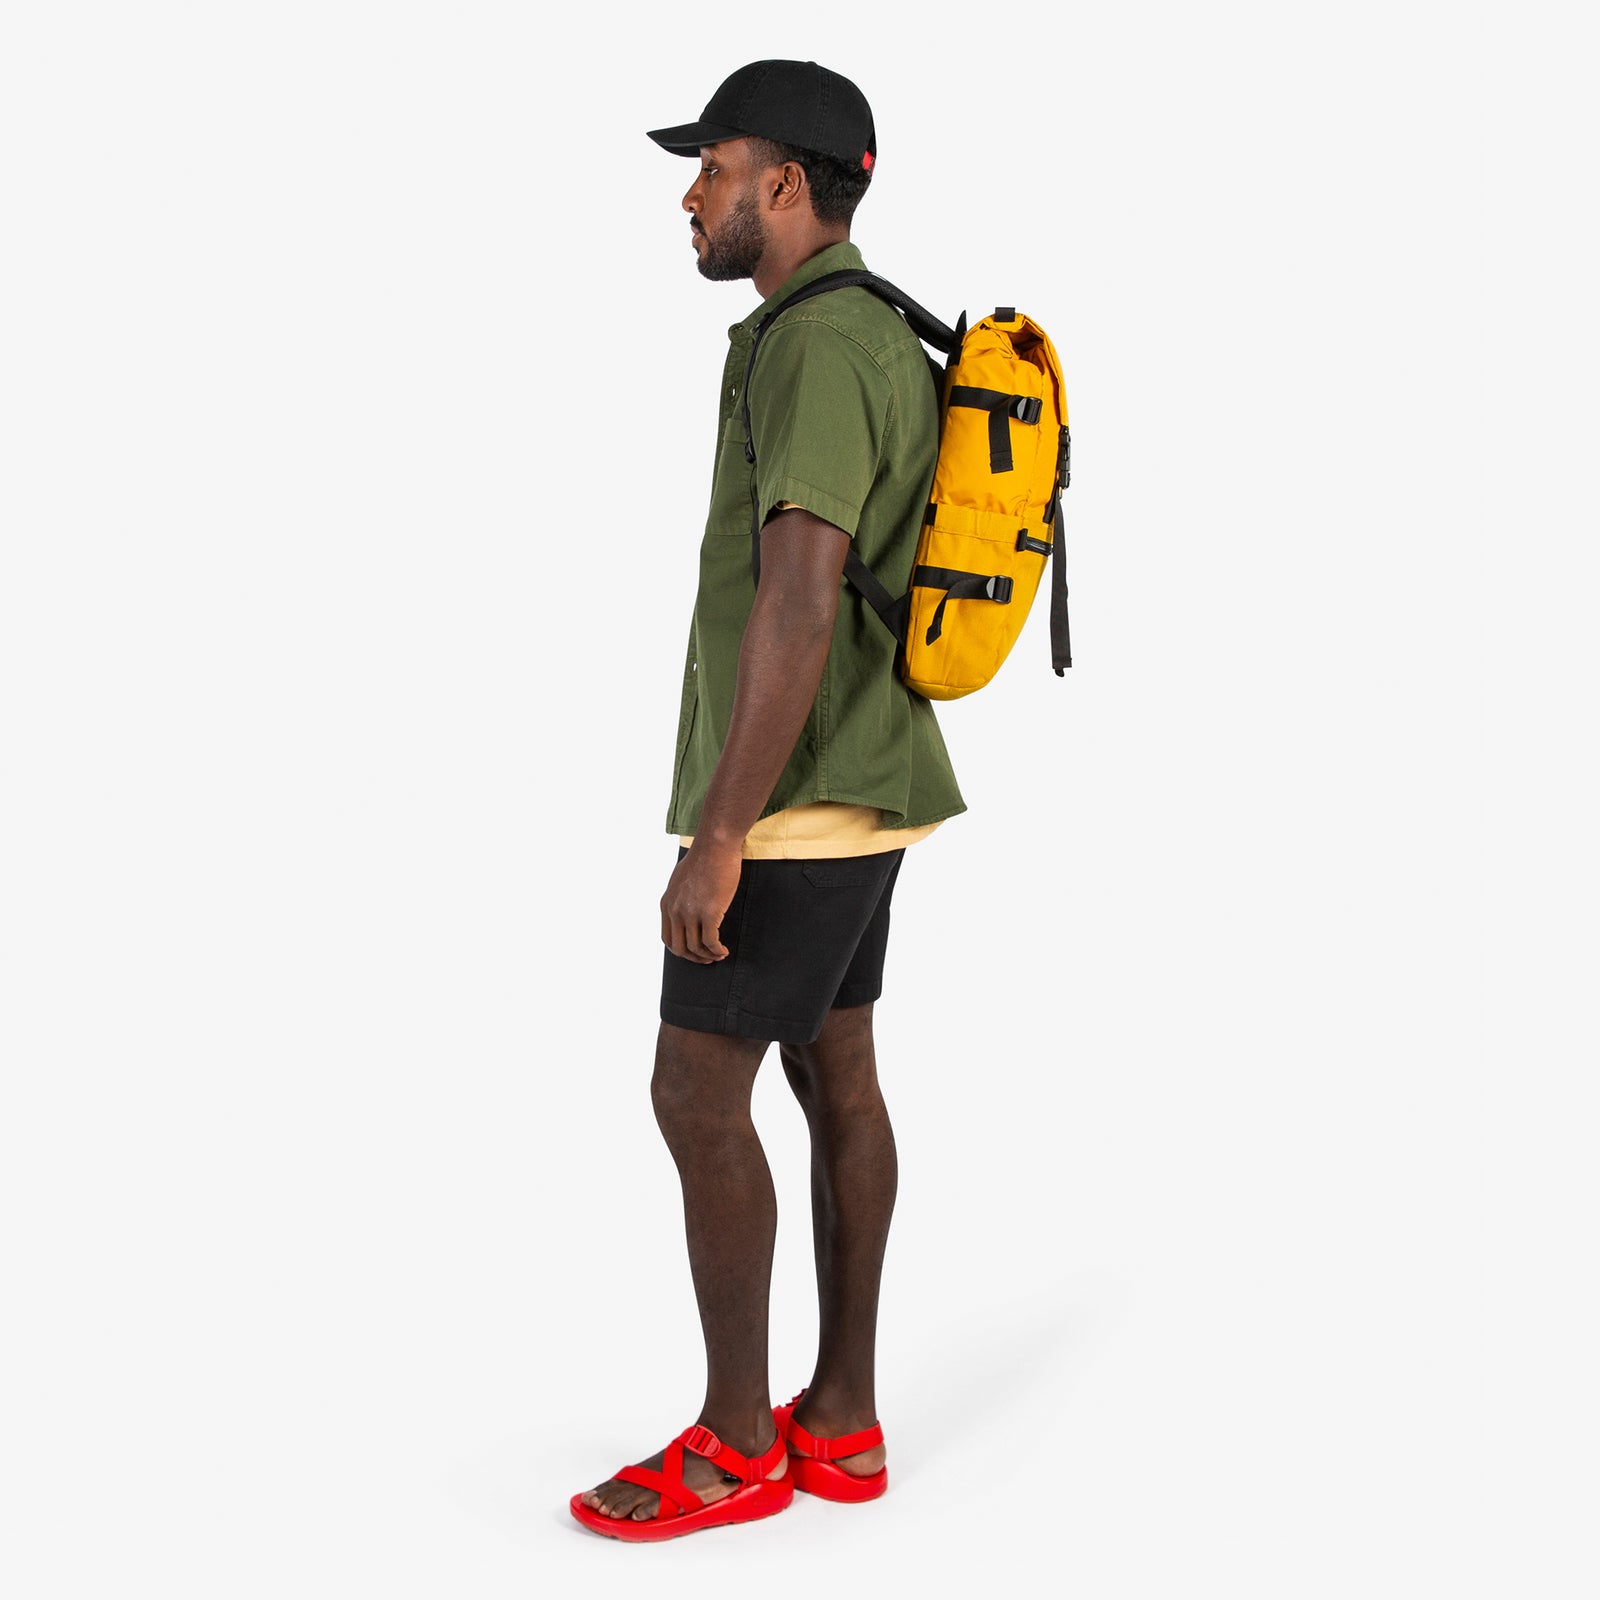 Topo Designs Rover Pack Classic in "Mustard" yellow carried by model with backpack straps.